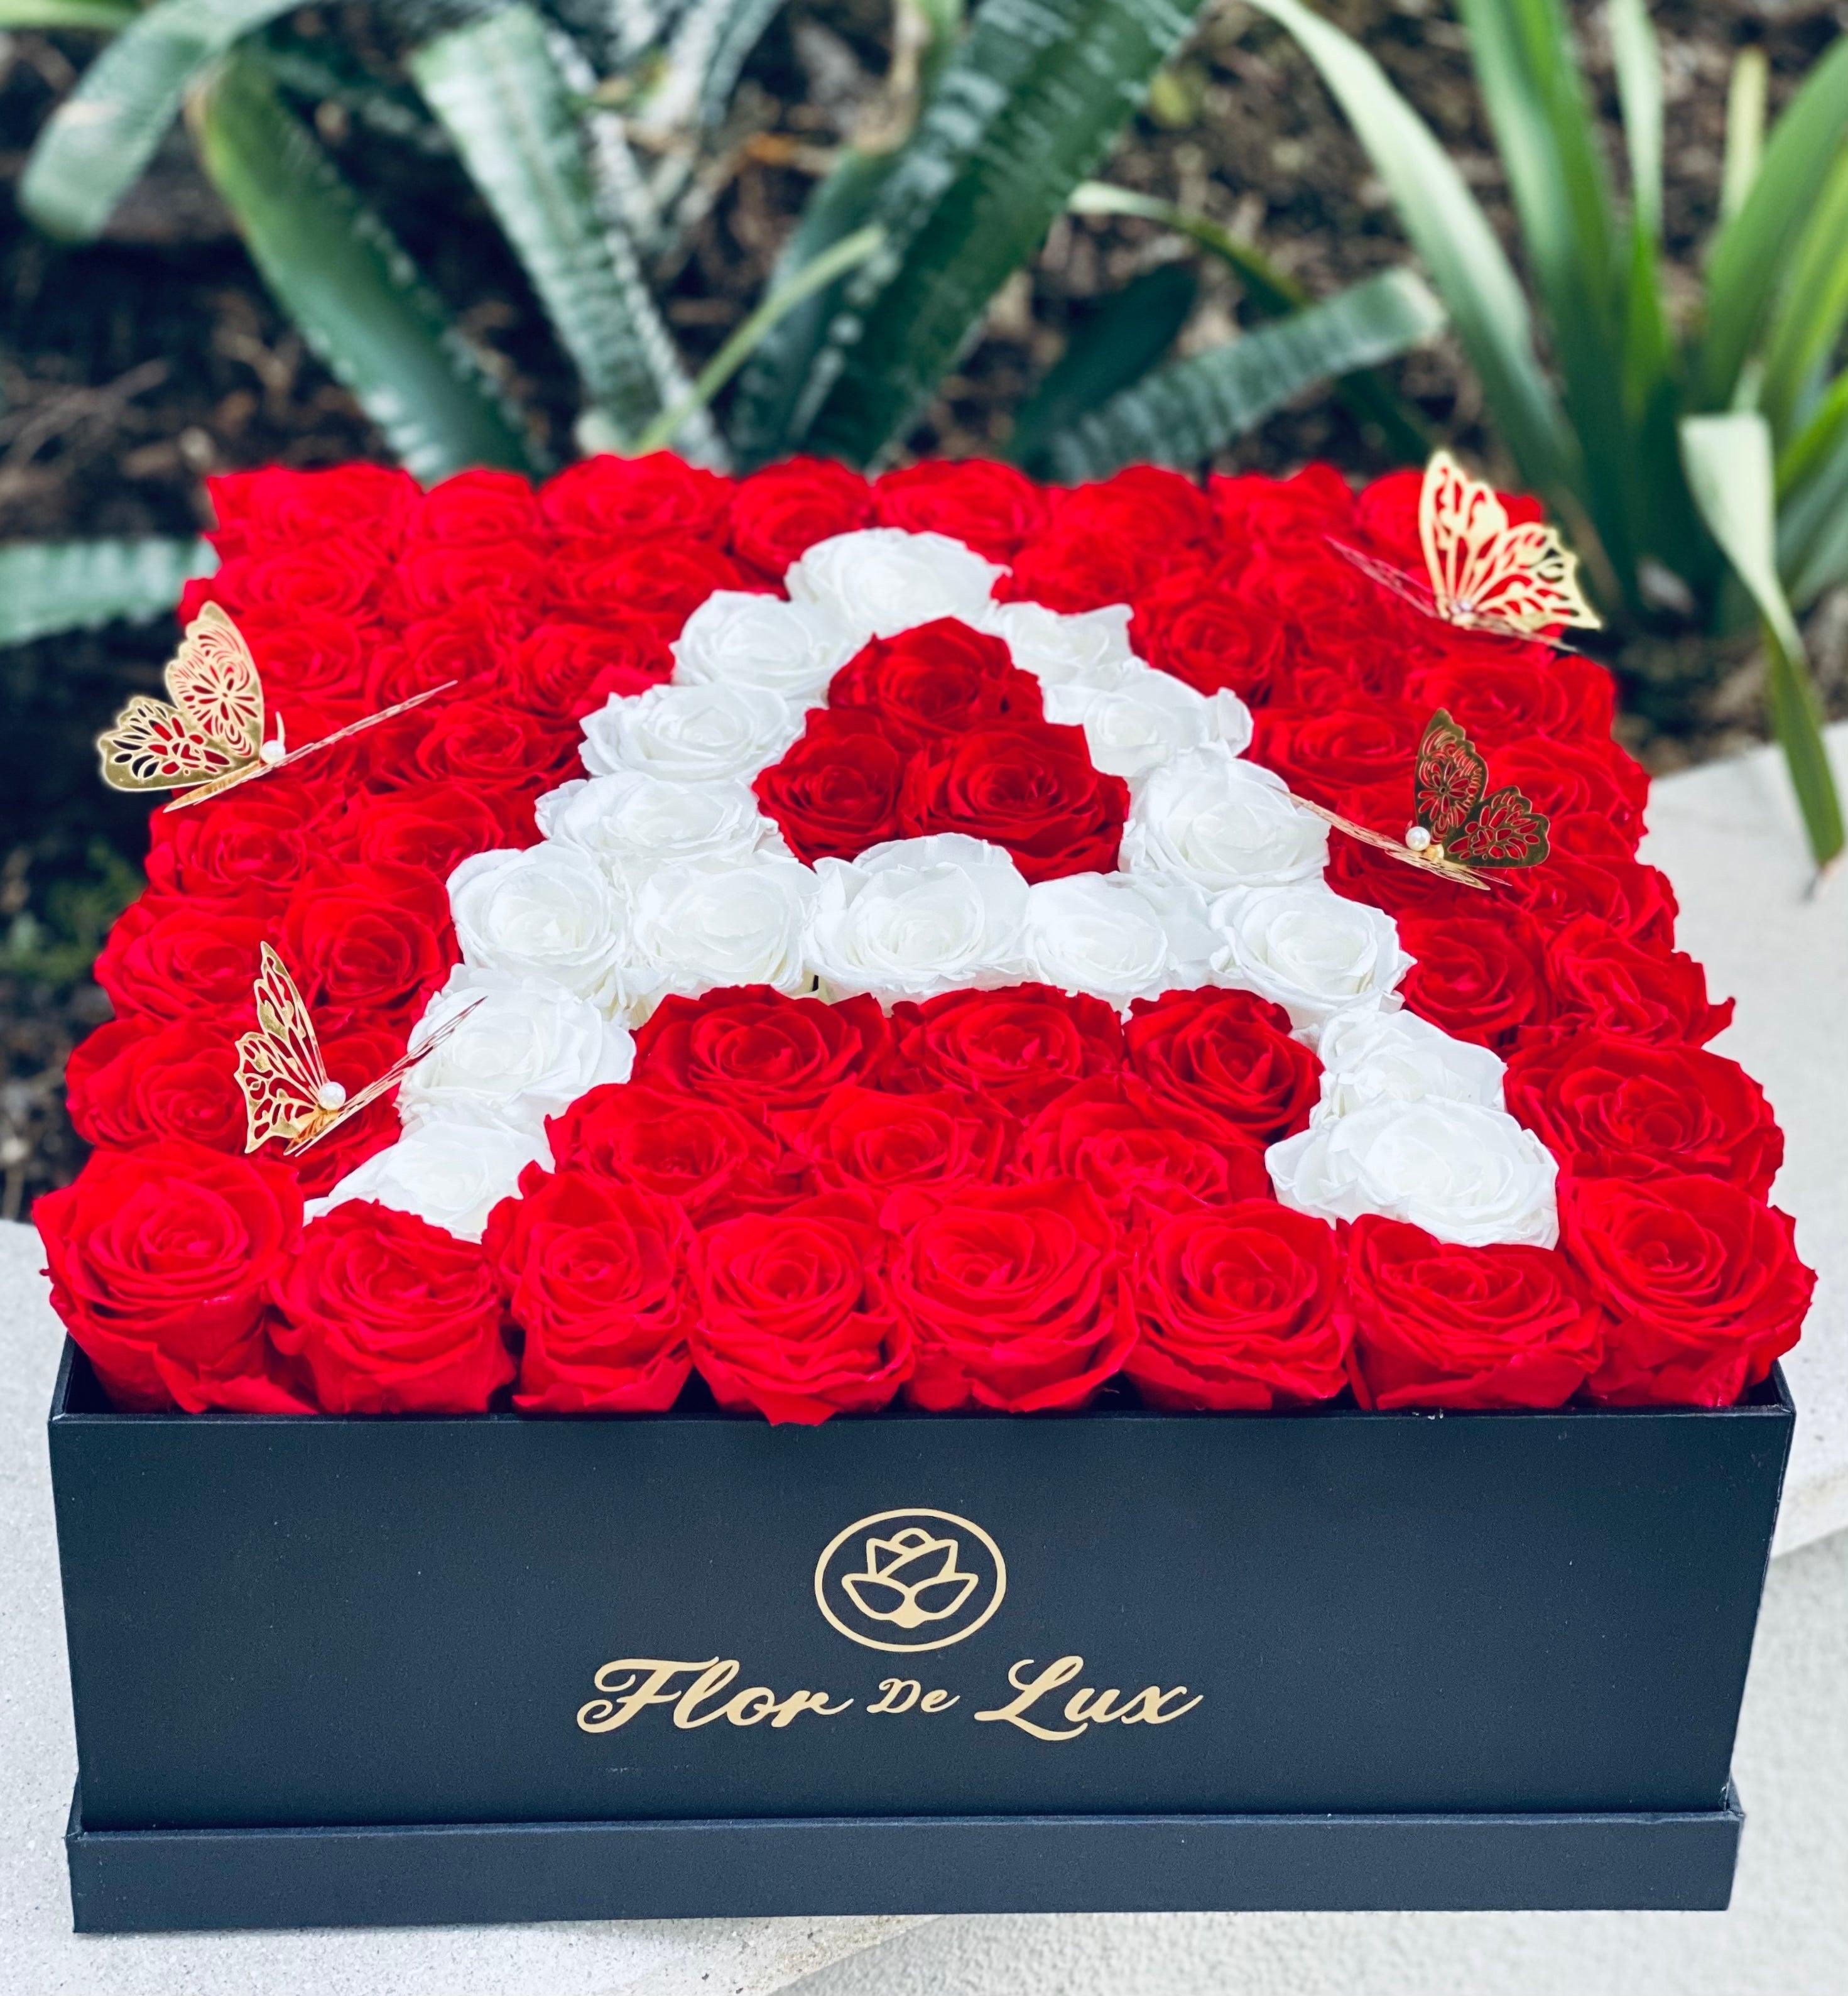 Jumbo Square Box - Preserved Roses - Flor De Lux